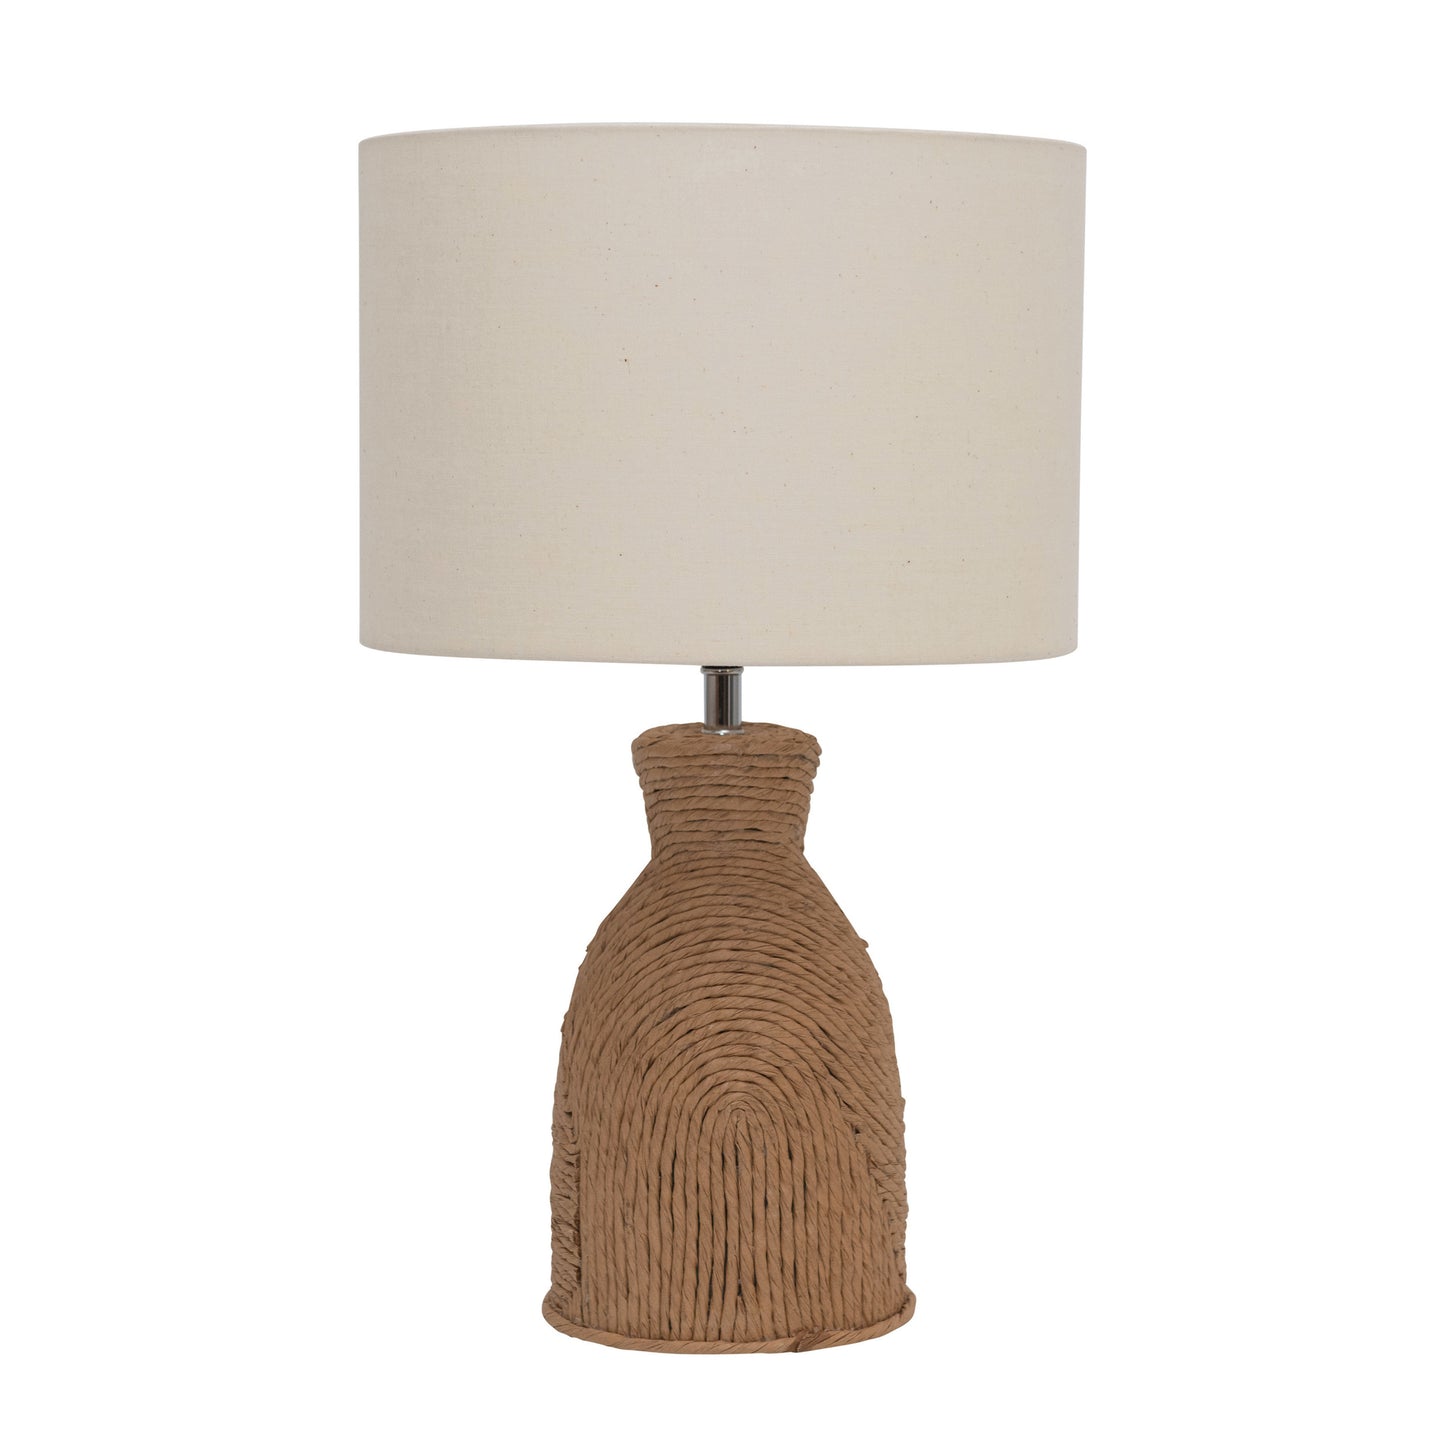 Lamp-Round Fiber Rope Table w Cotton Shade